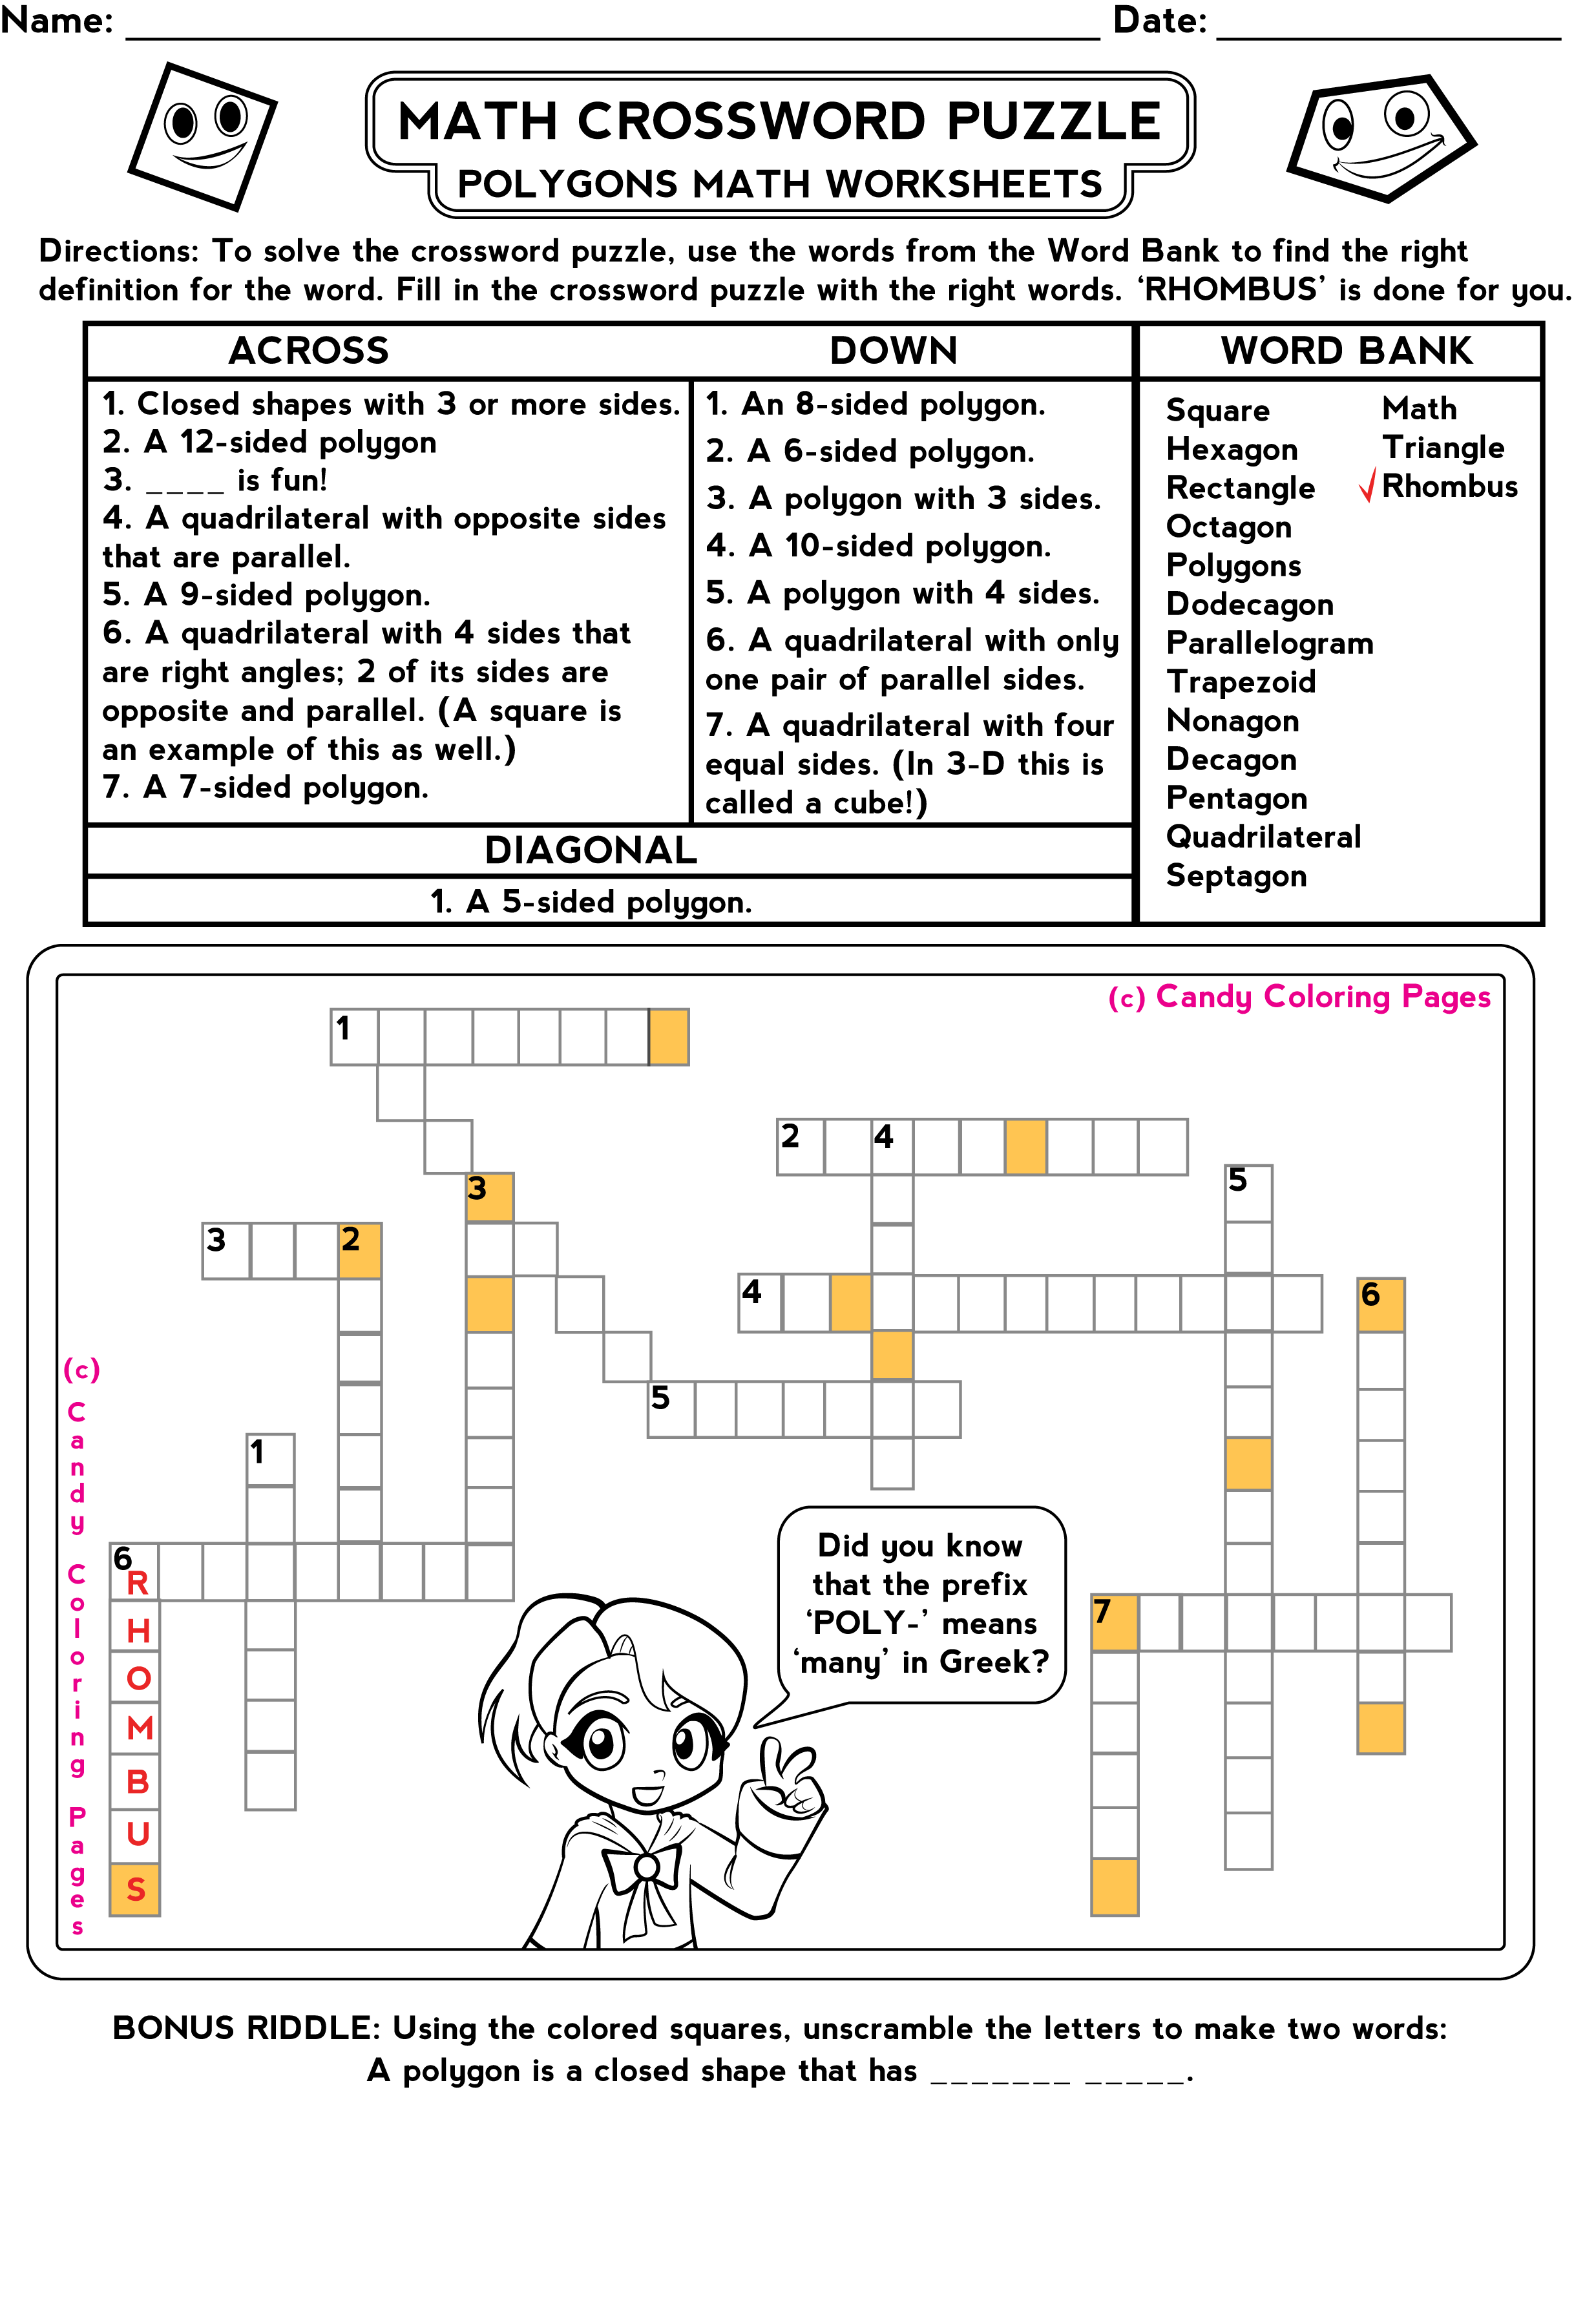 Crossword Math Puzzle Worksheets Free Image